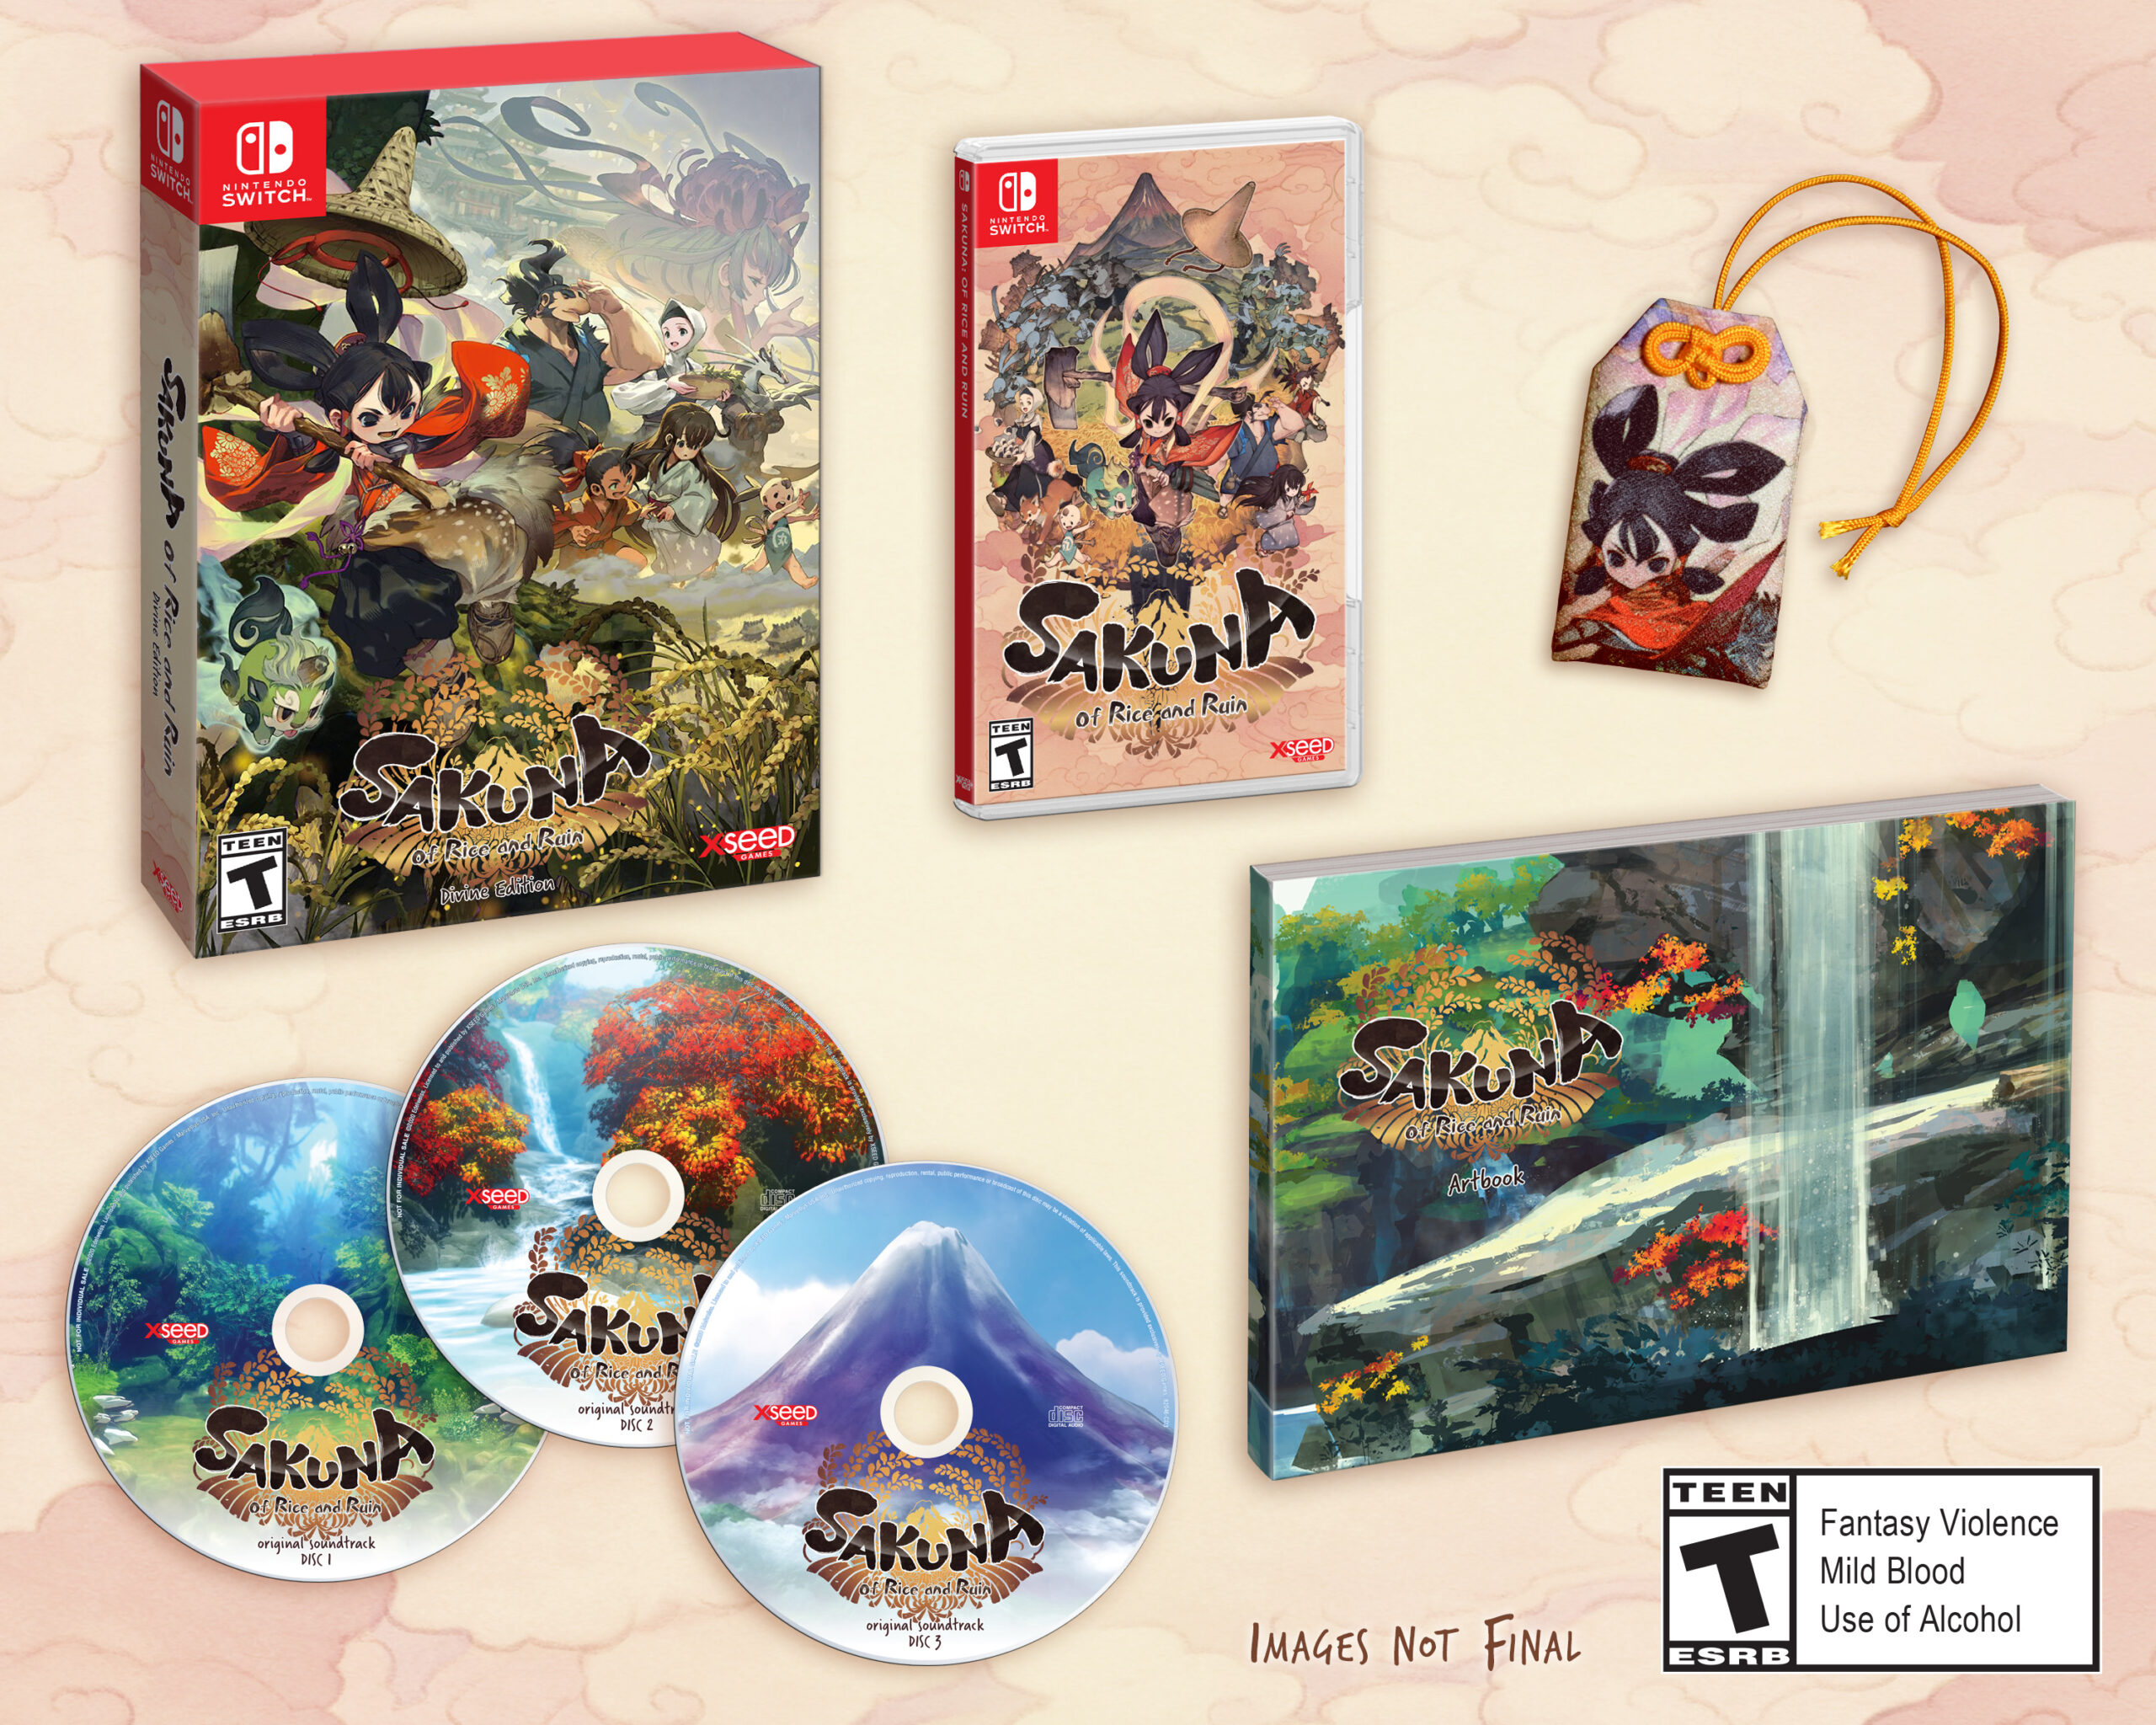 Sakuna-of-rice-and-ruin-nintendo-switch-divine-edition-scaled.jpg